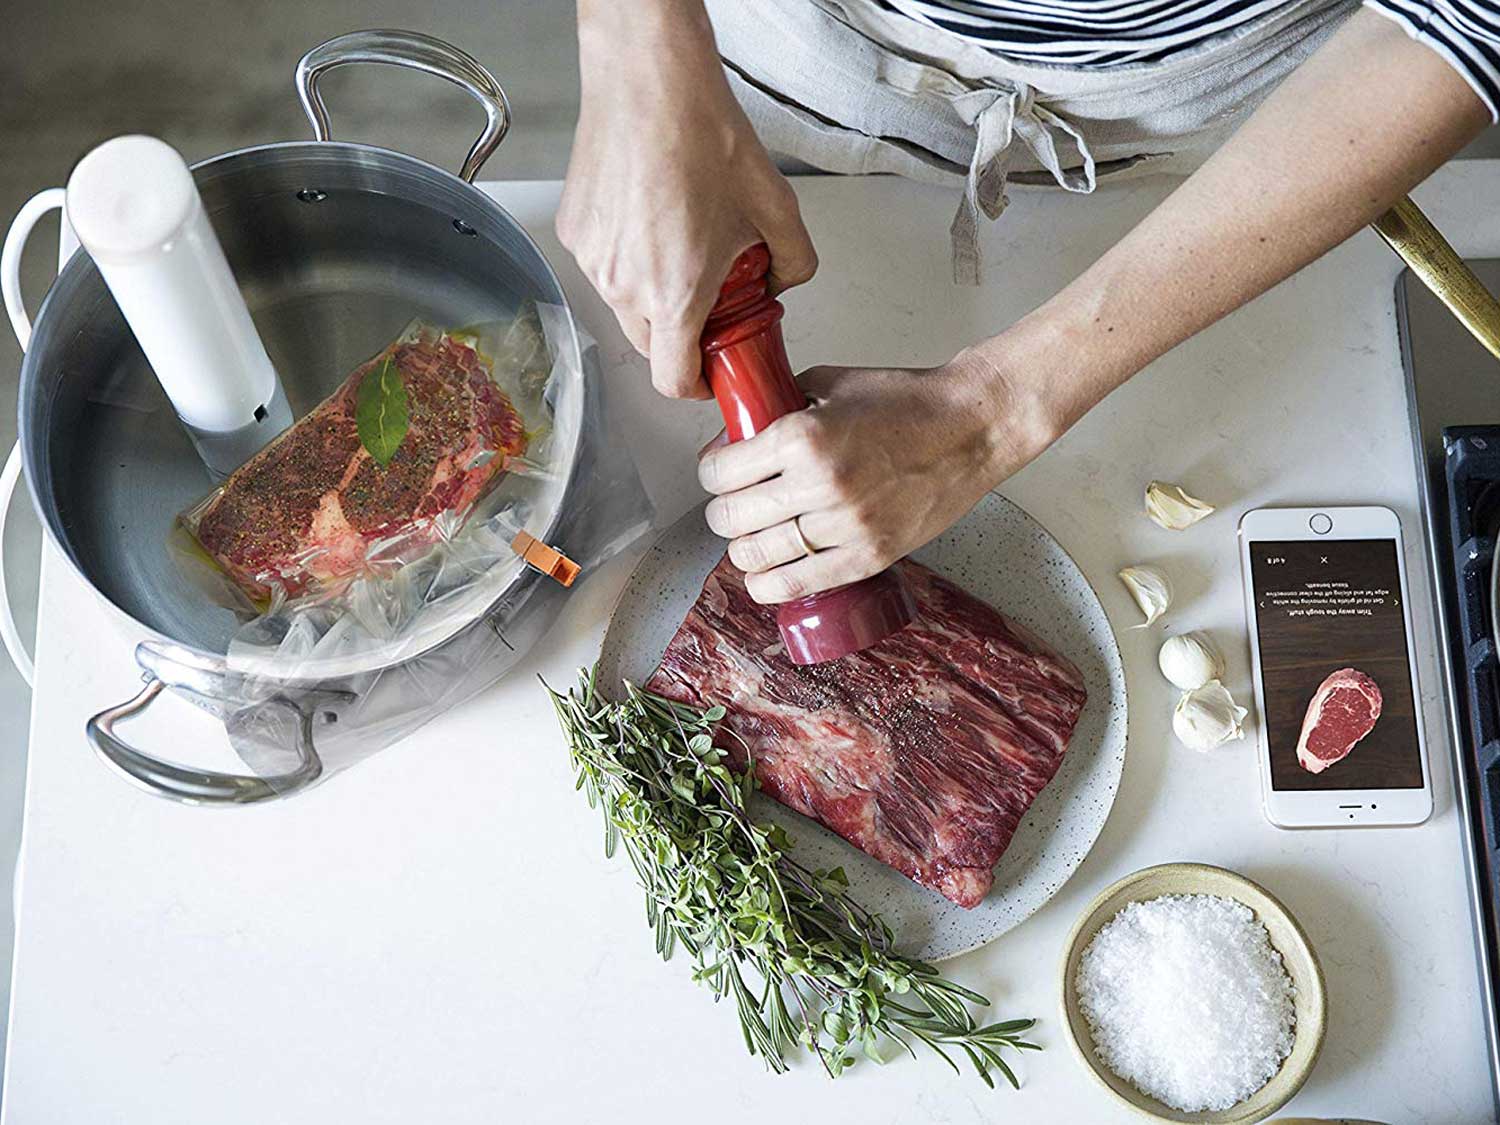 Preparing meals with sous vide opens up a world of possibility.